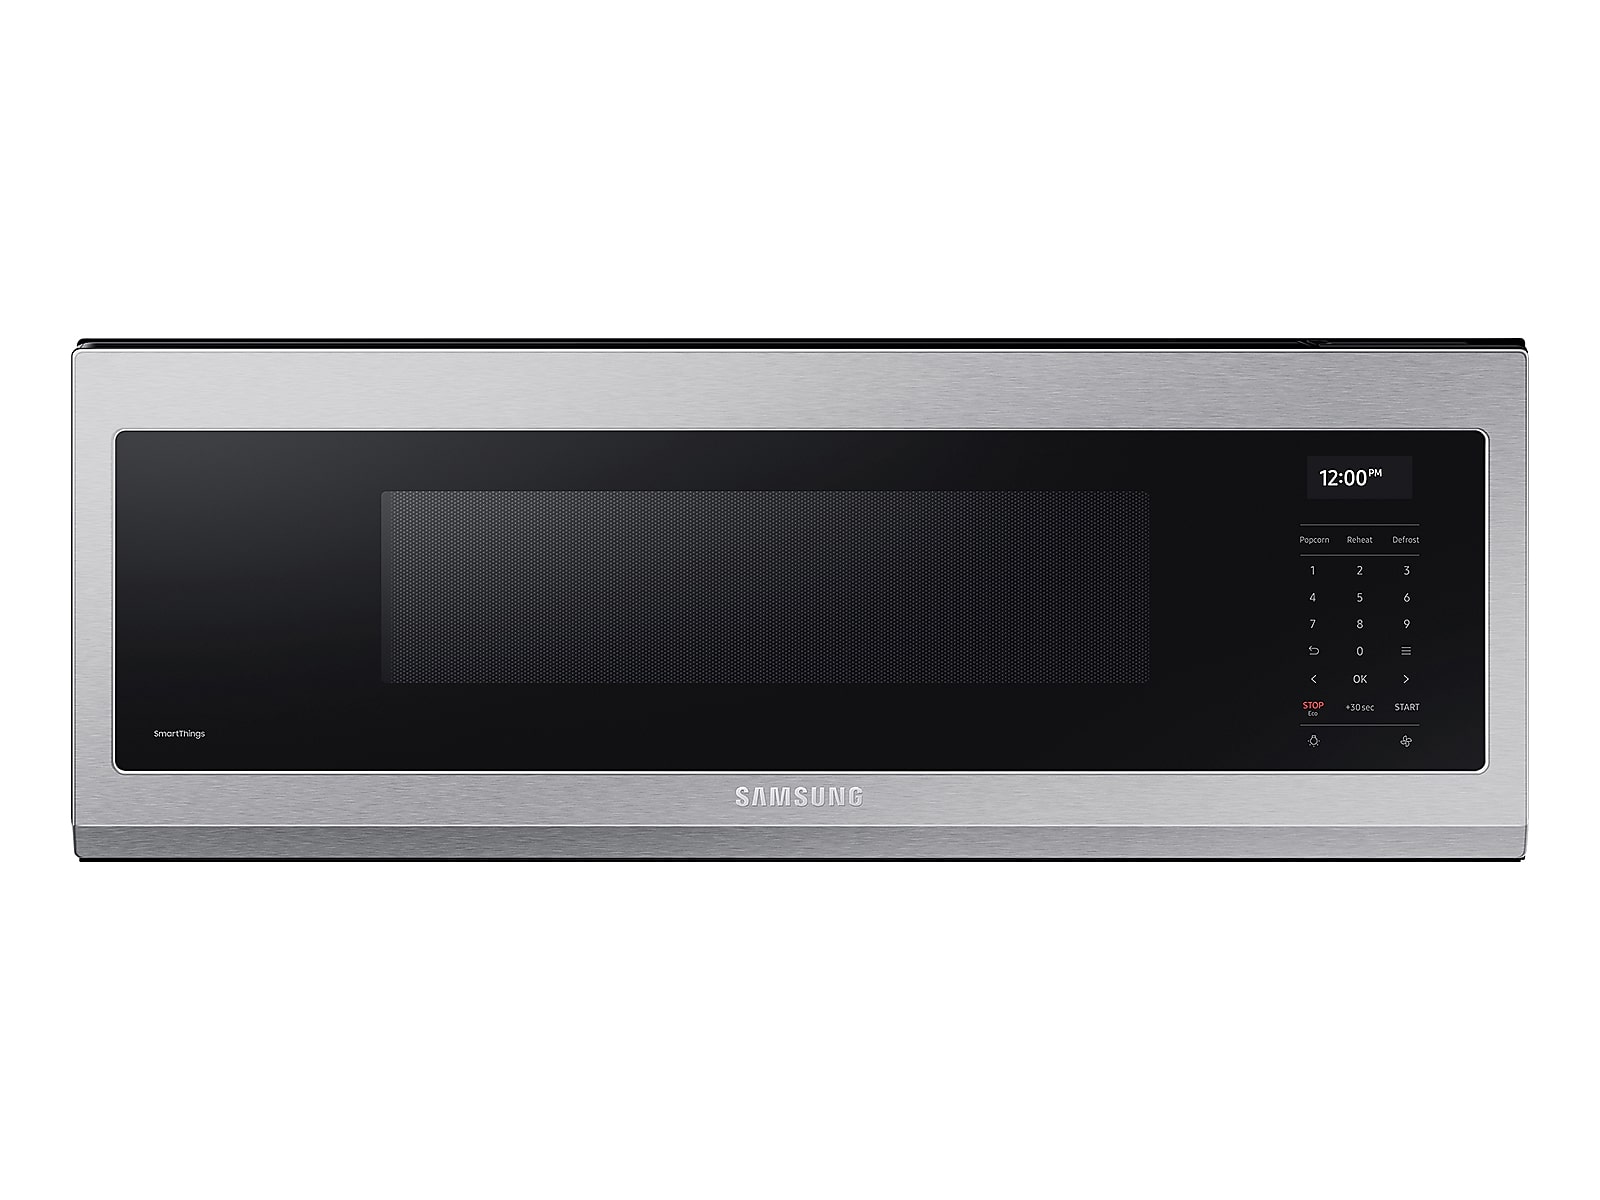 Samsung 1.1 cu. ft. Smart SLIM Over-the-Range Microwave with 550 CFM Hood Ventilation, Wi-Fi & Voice Control in Stainless Steel(ME11A7710DS/AA) photo